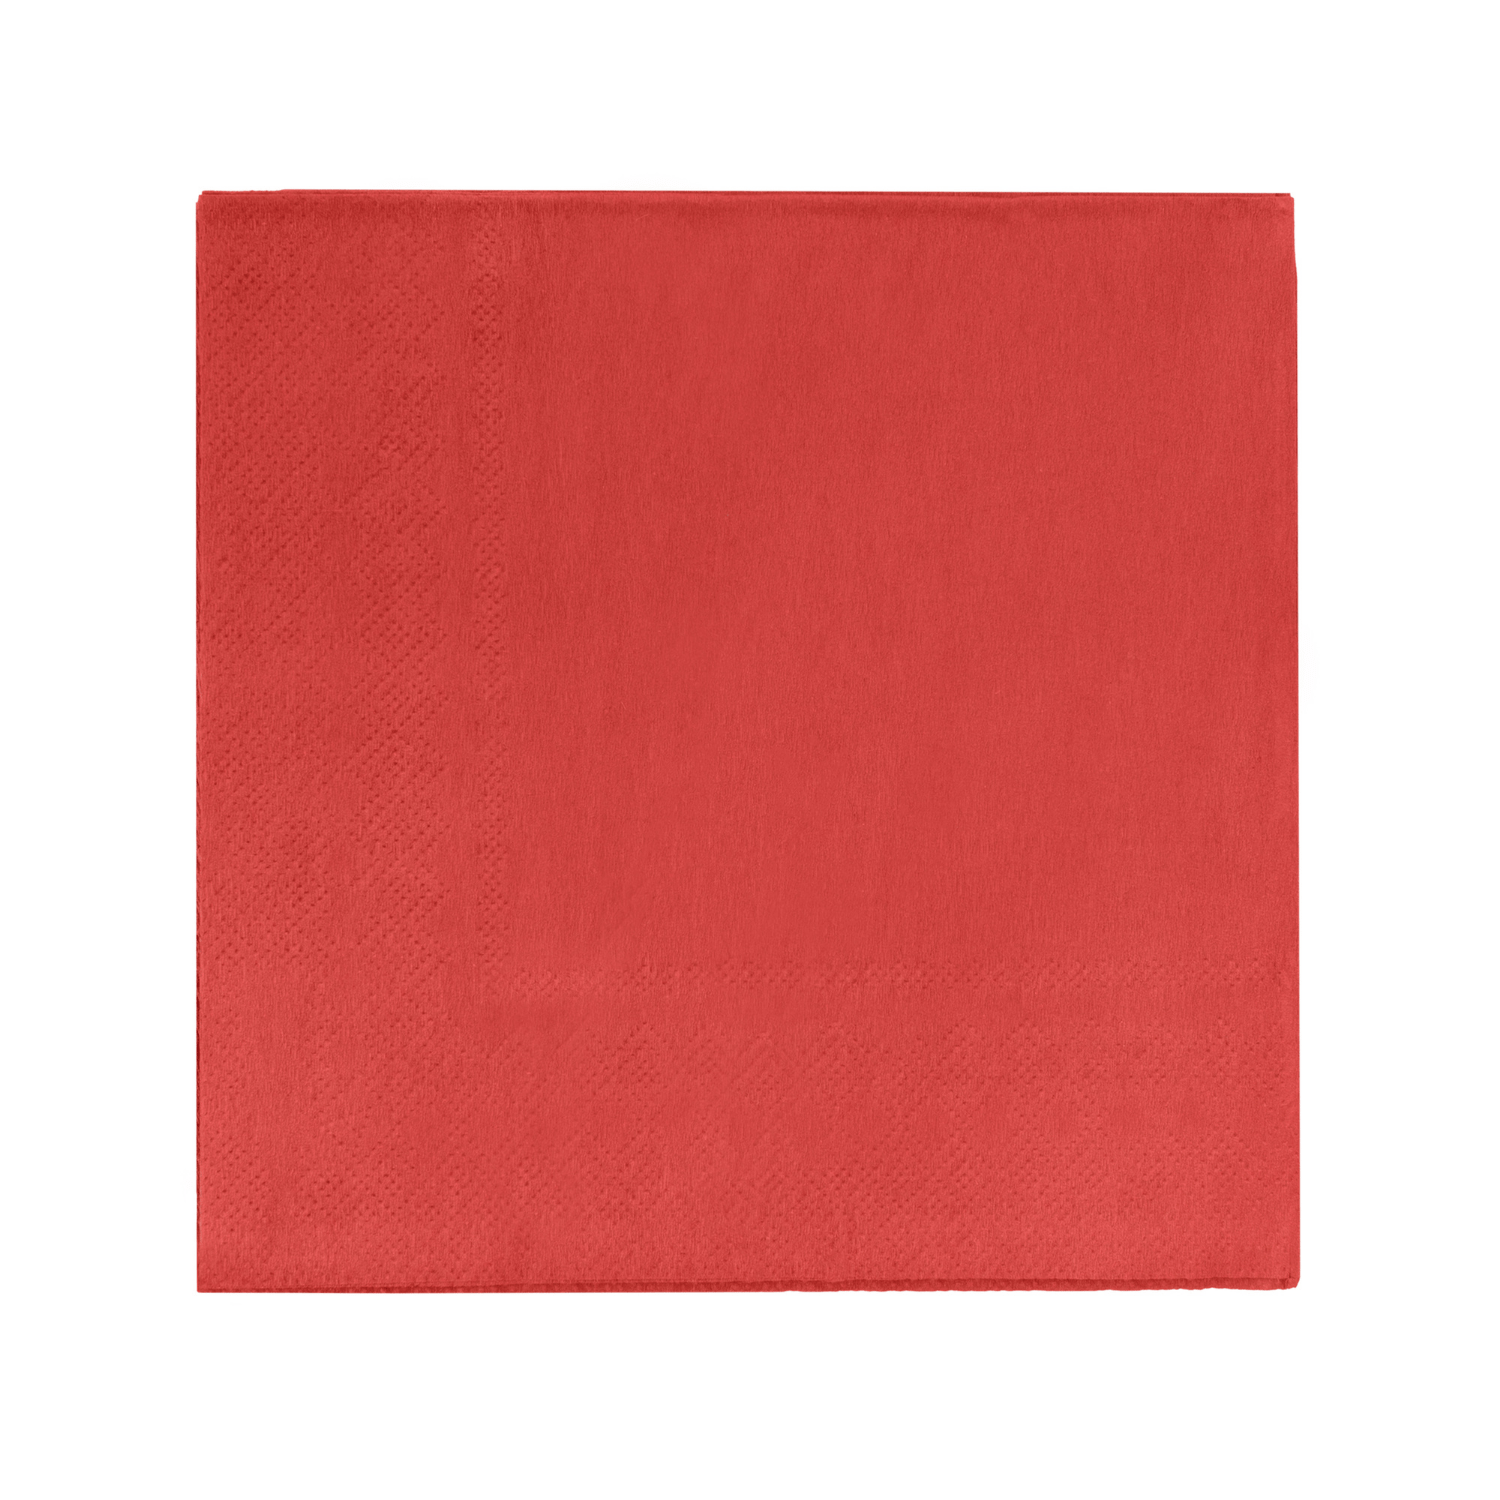 Red Luncheon Napkins | 3600 Pack - Yom Tov Settings